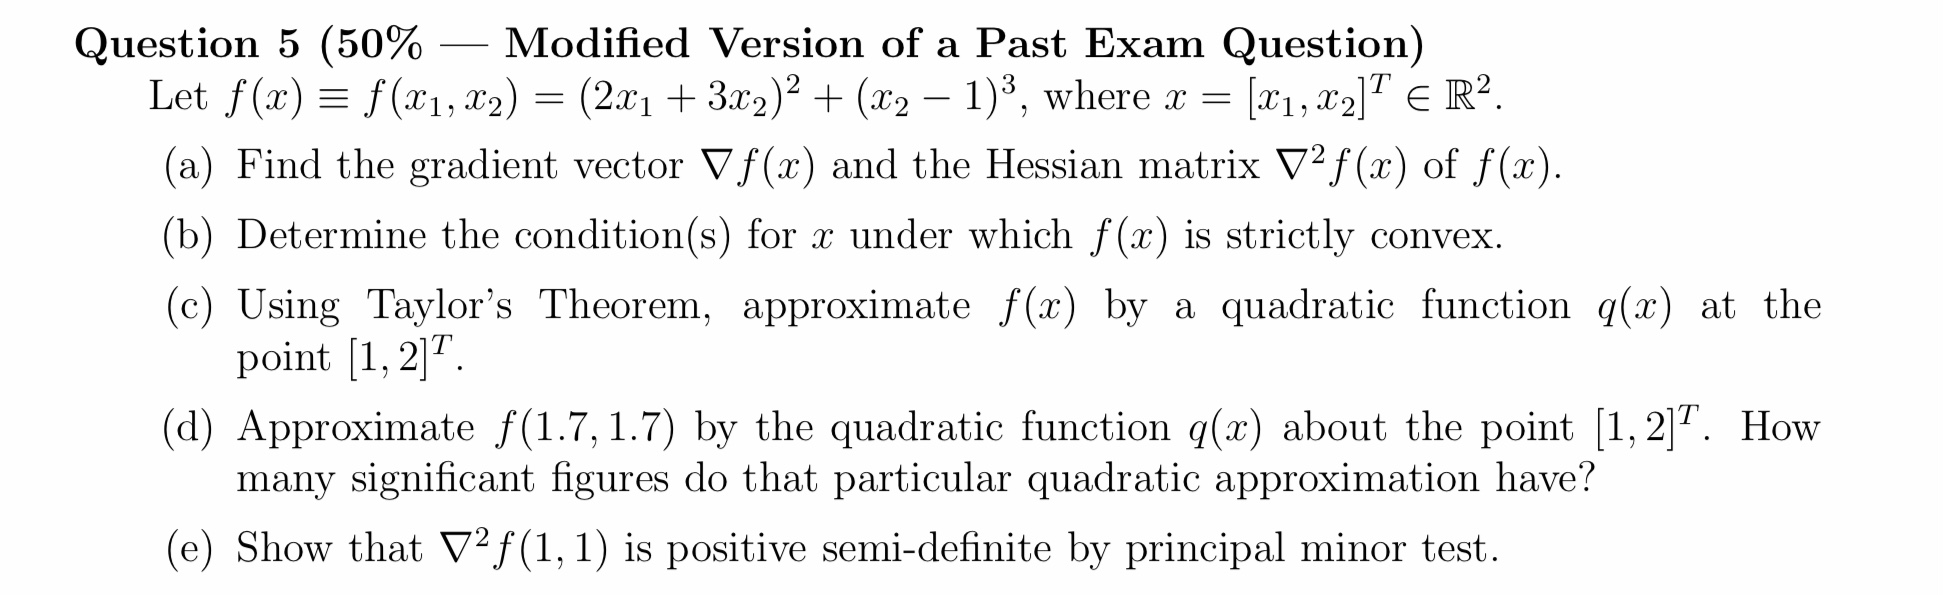 Question 5 (50% - Modified Version of a Past Exam Question) Let (x) = f(x, x2) = (2x + 3x2) + (x2  1), where